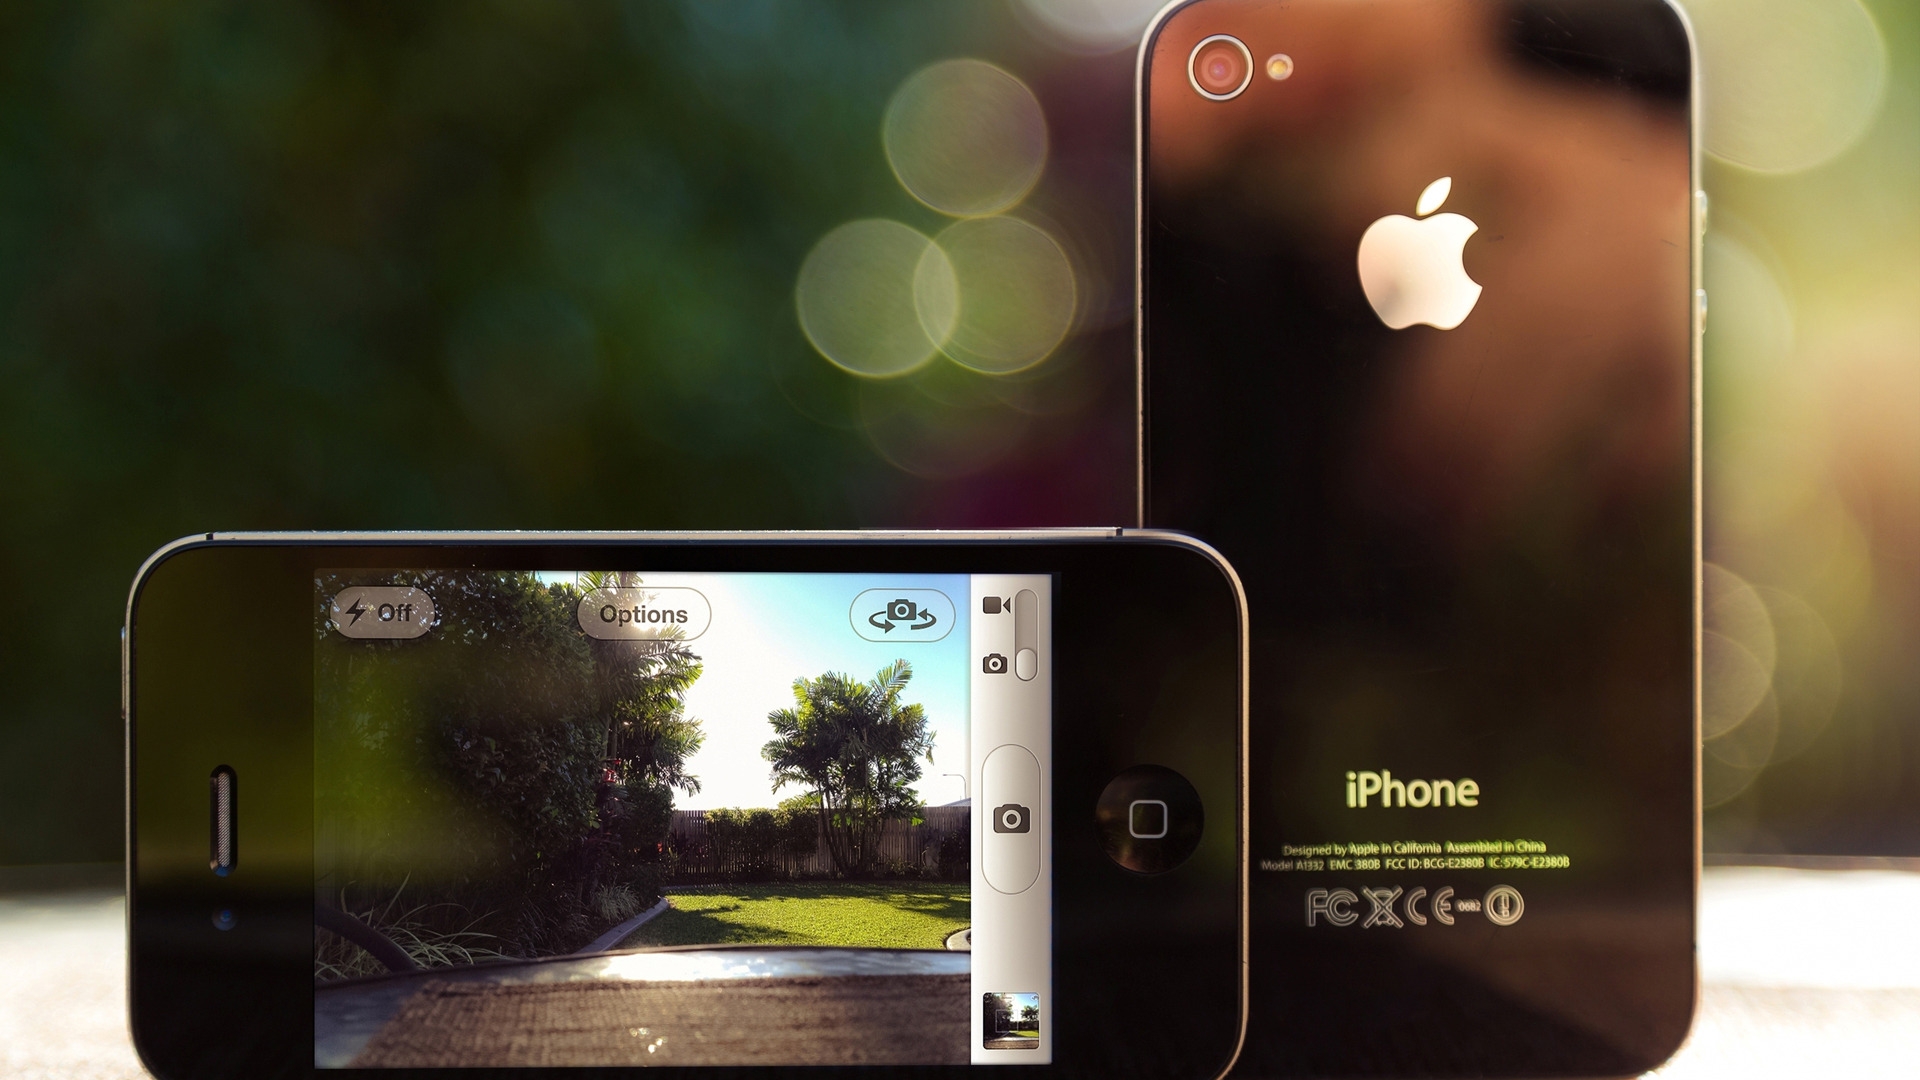 iPhone 4 for 1920 x 1080 HDTV 1080p resolution